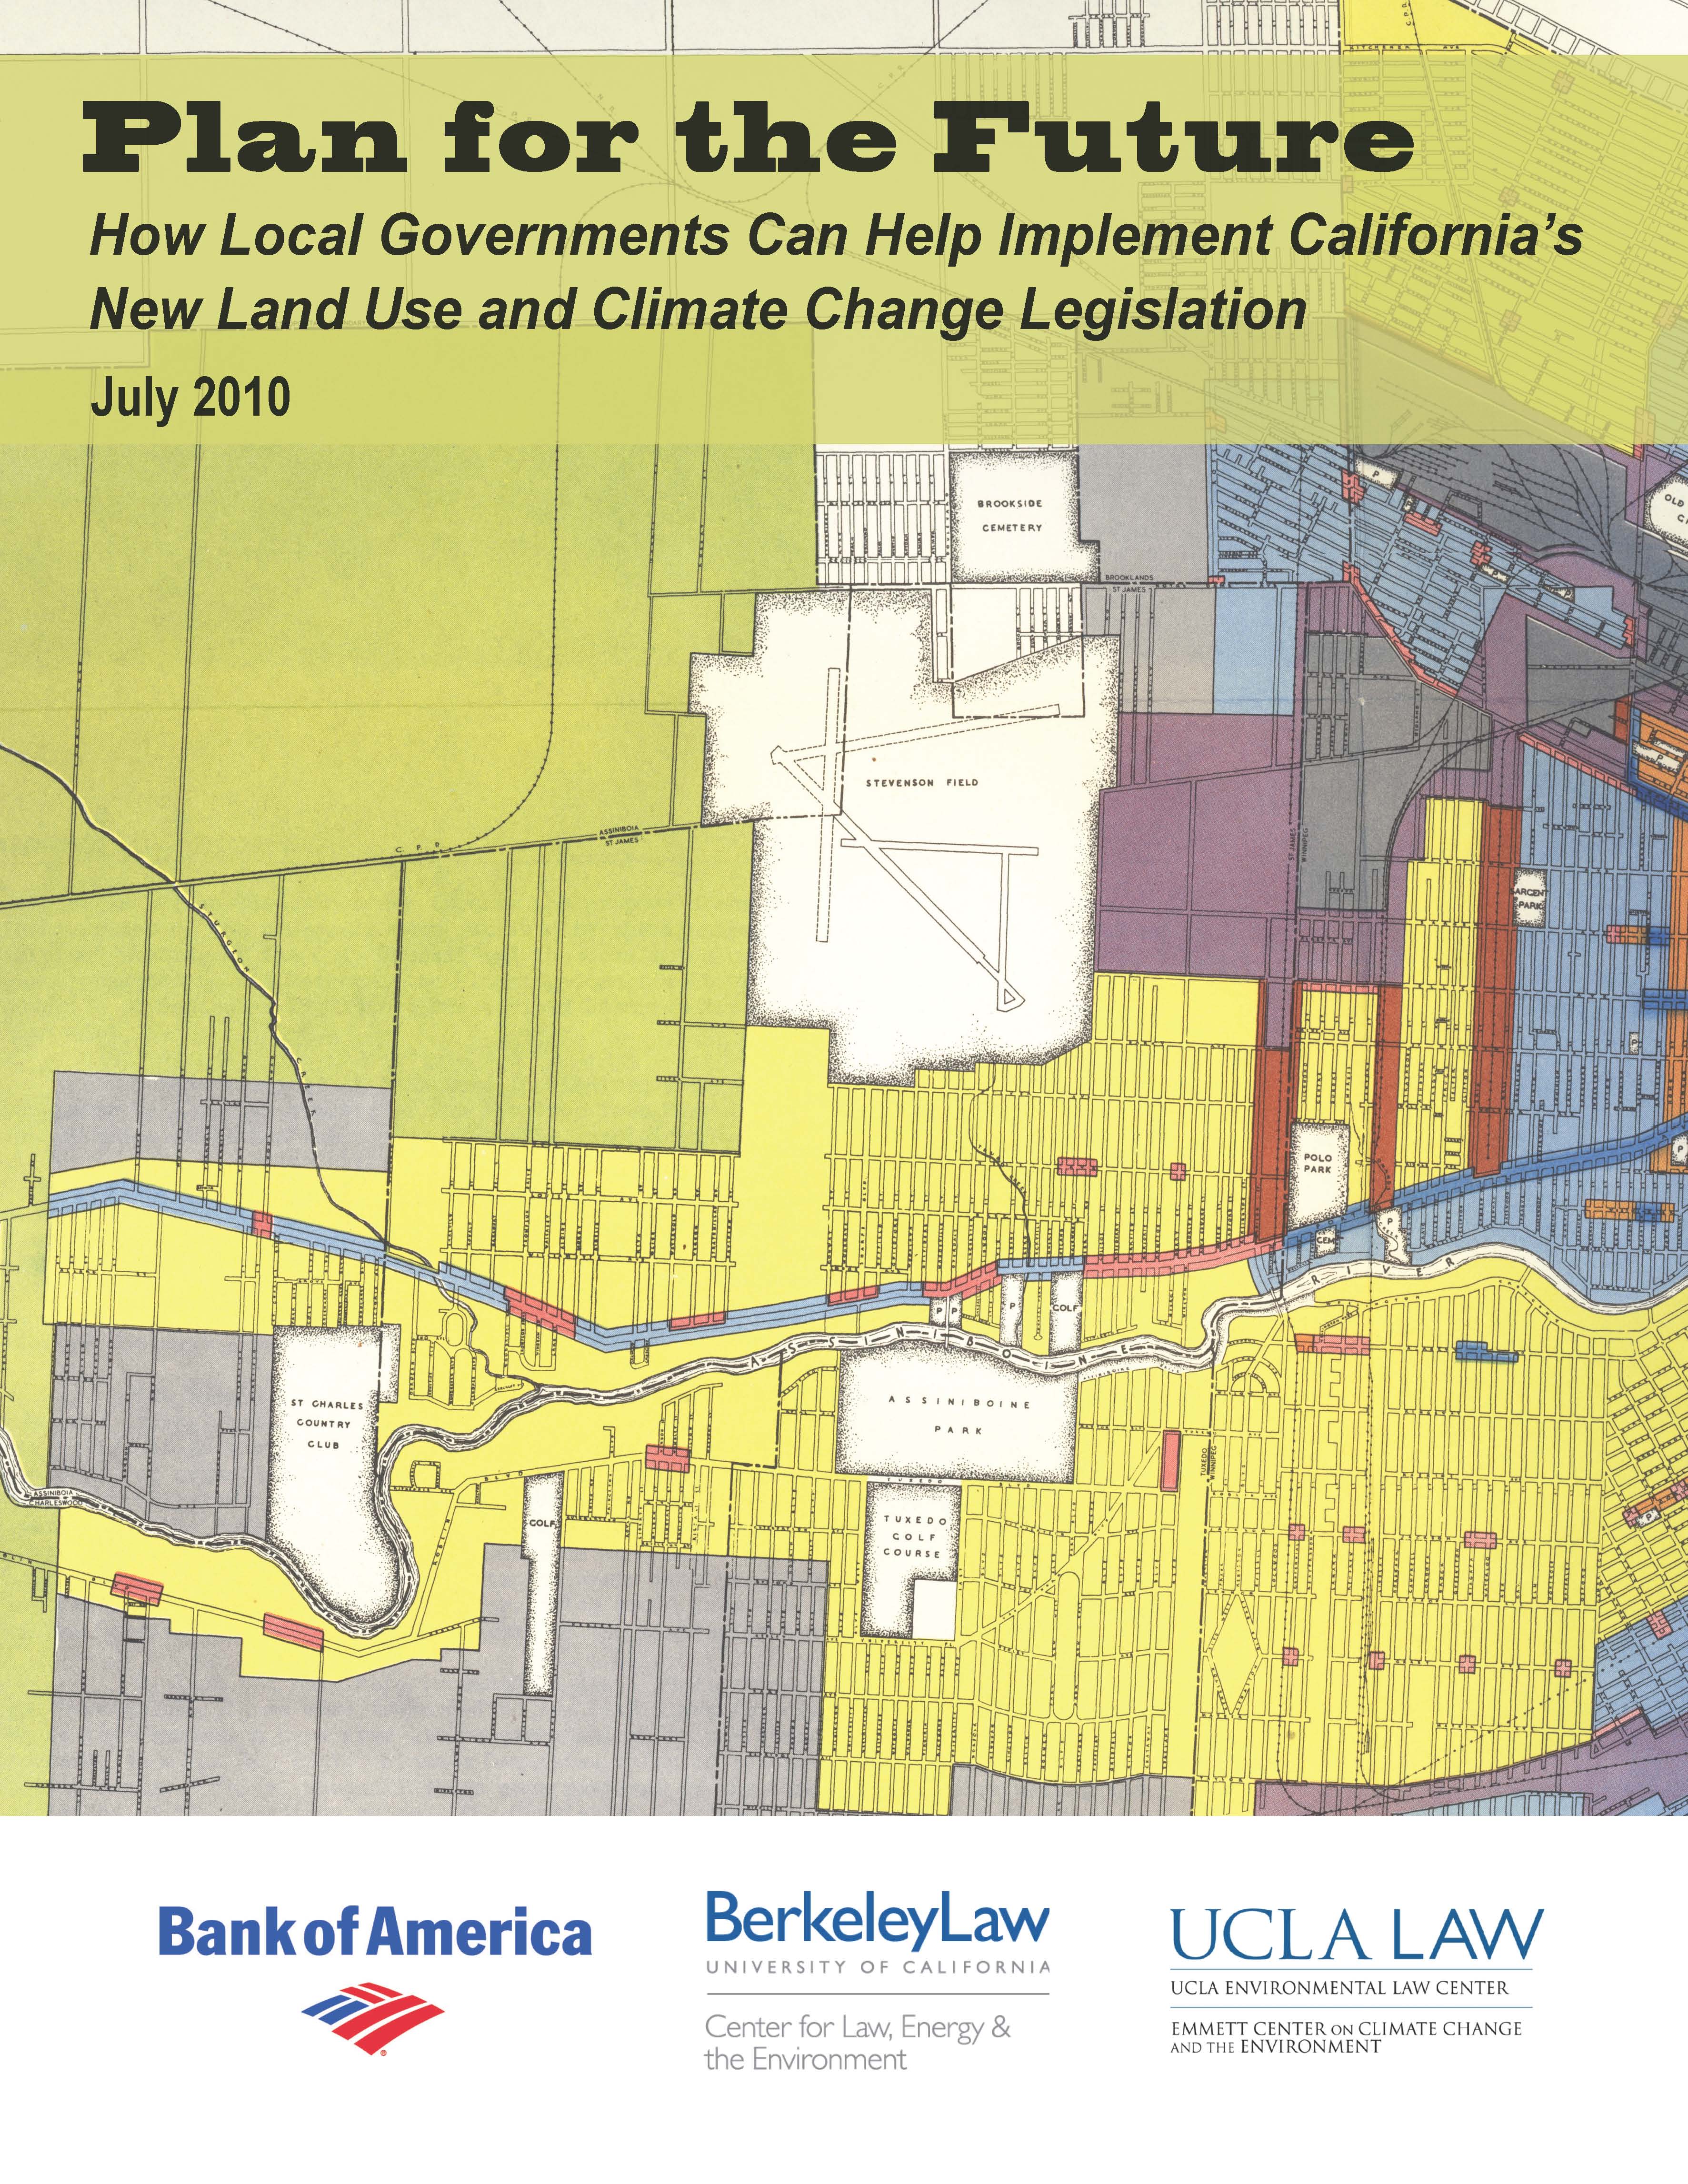 View Plan for the Future: How Local Governments Can Help Implement California’s New Land Use and Climate Change Legislation report